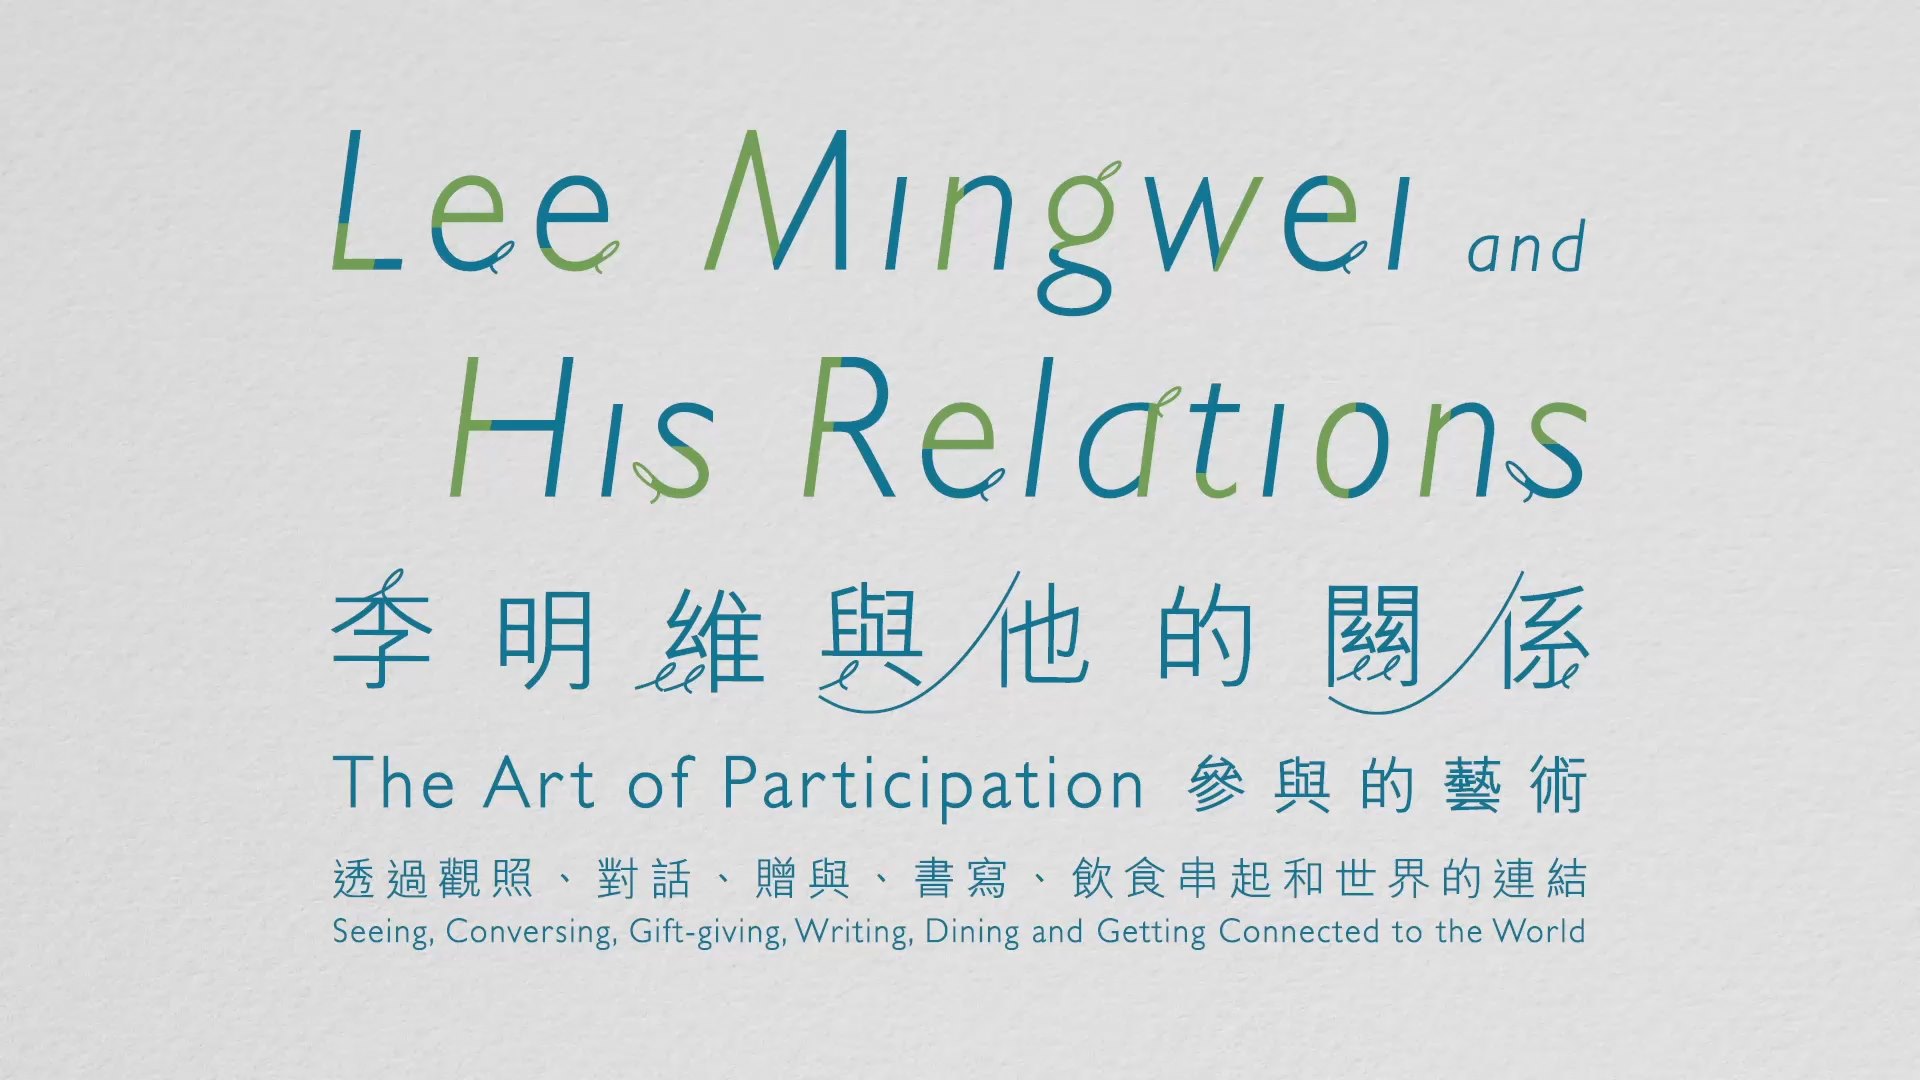  Lee Mingwei and His Relations: The Art of Participation